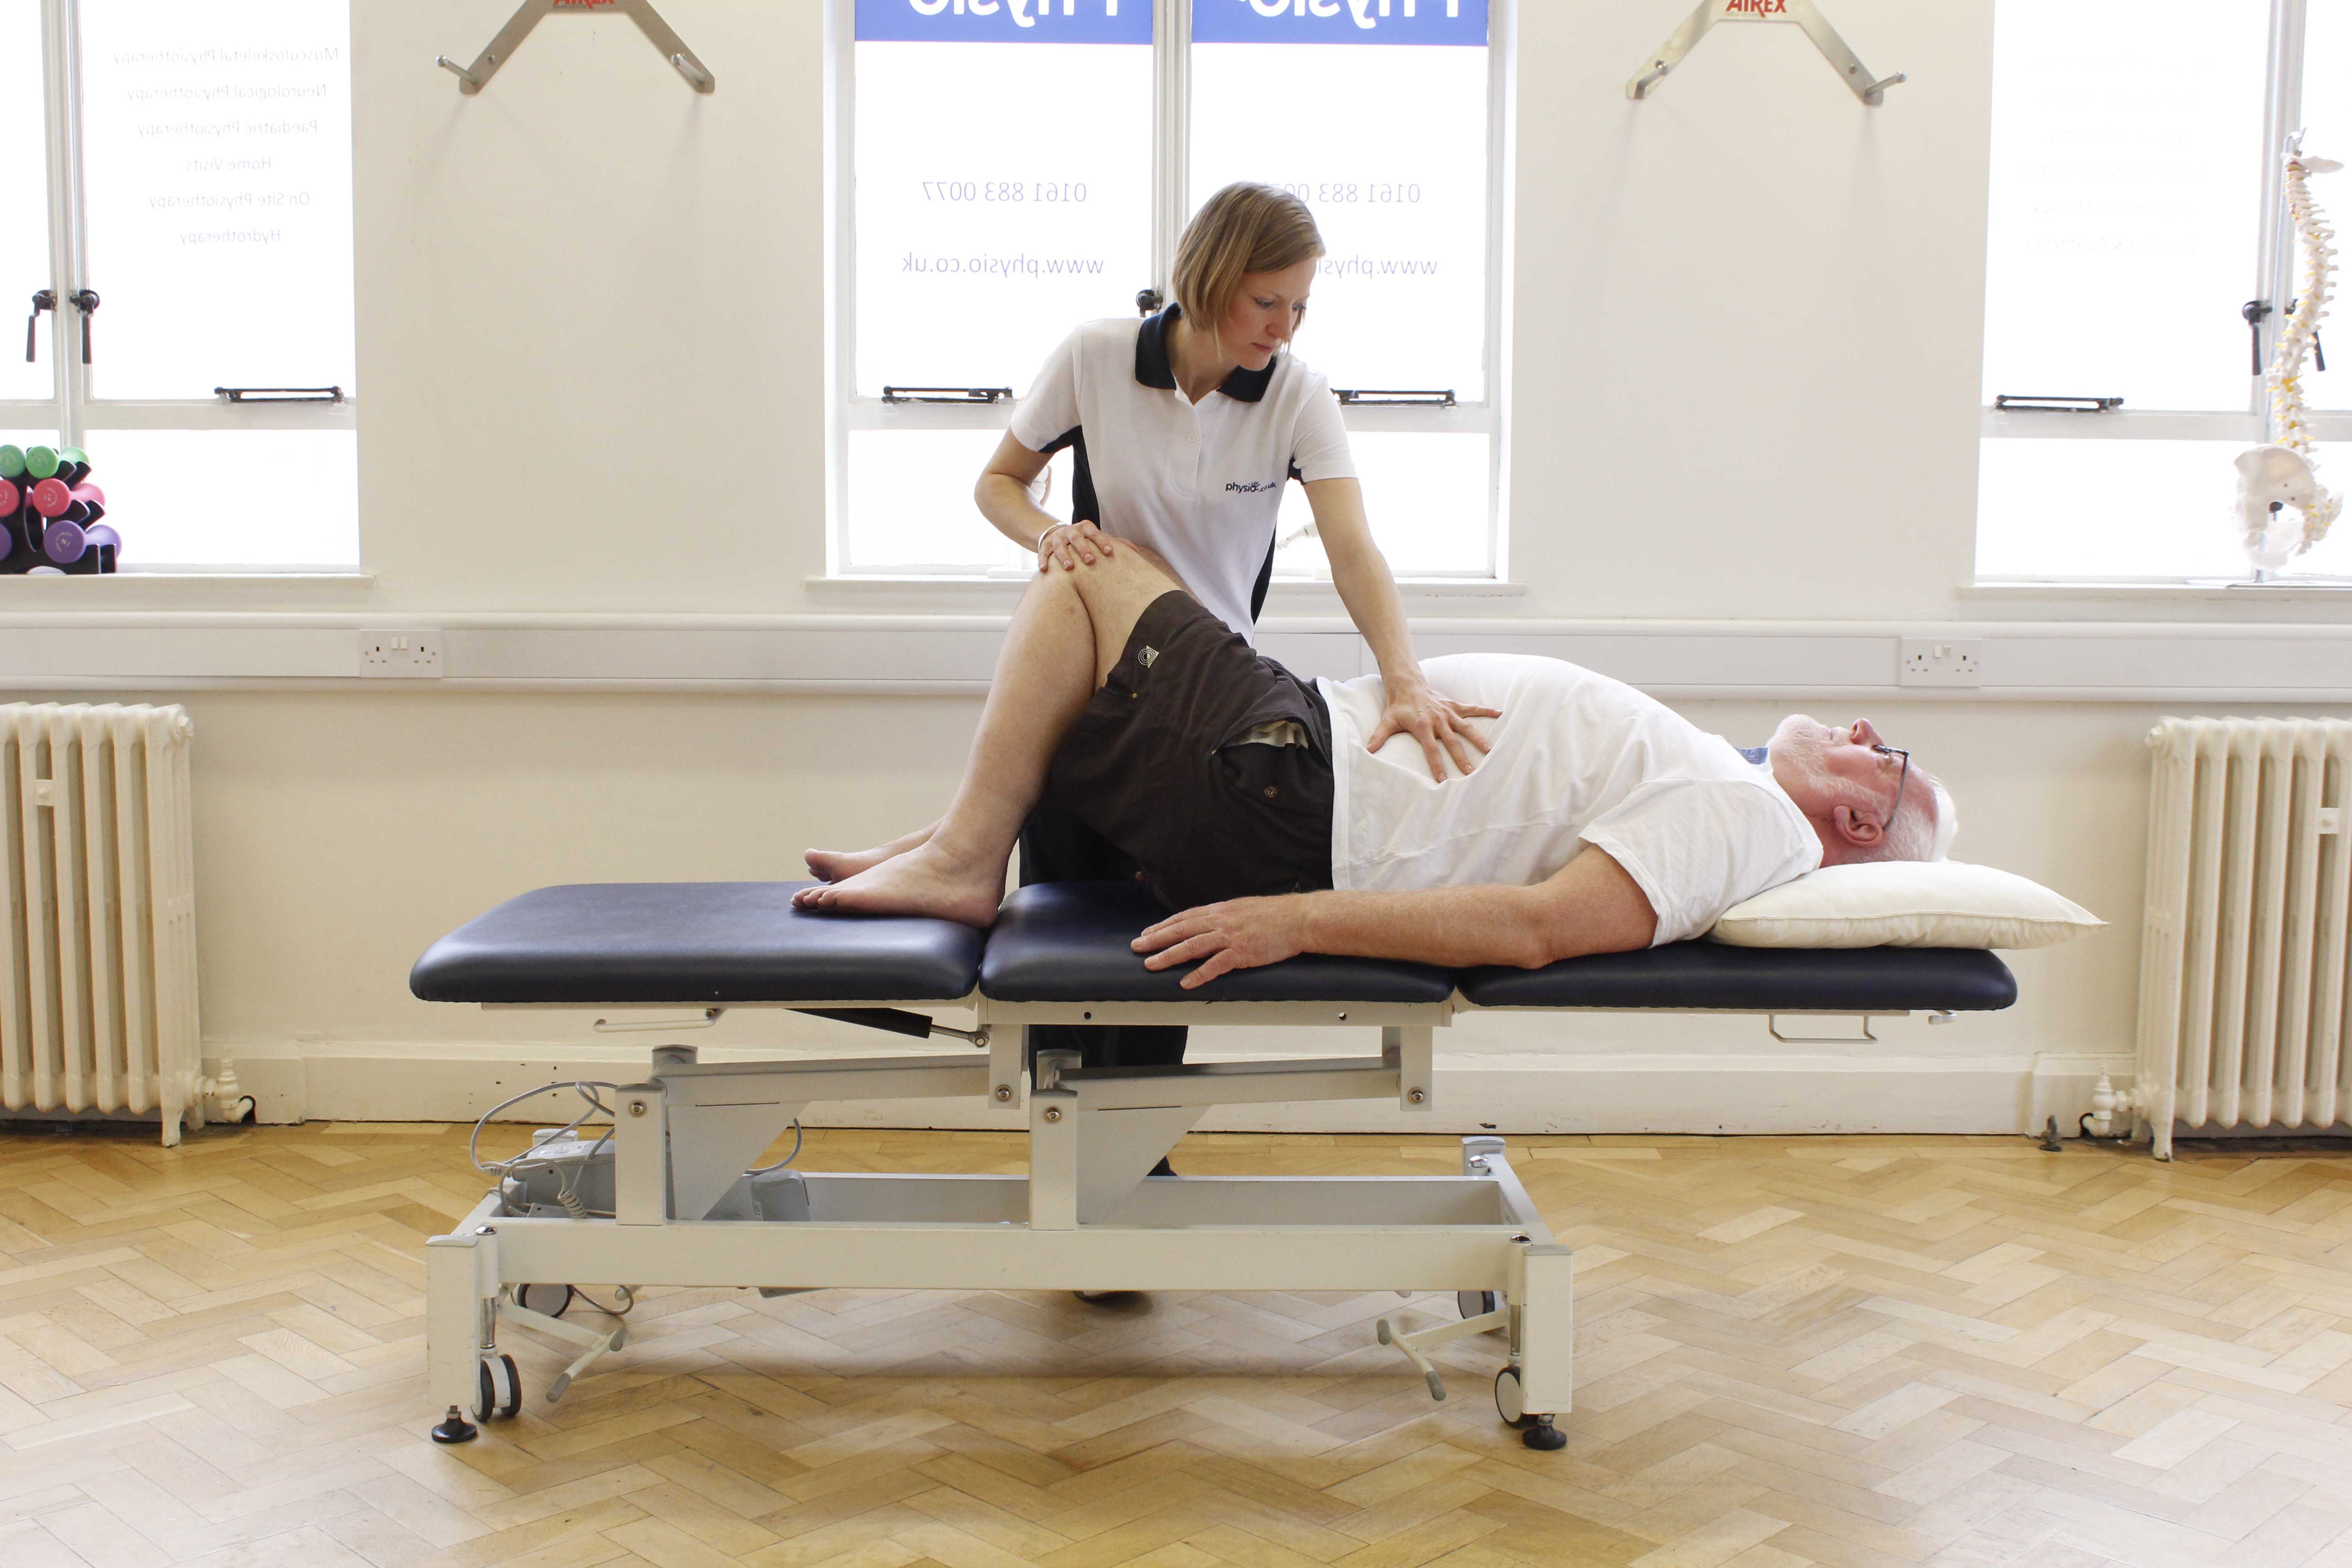 Active cycle of breathing exercises  and postural drainage exercises supervised by a specialist physiotherapist